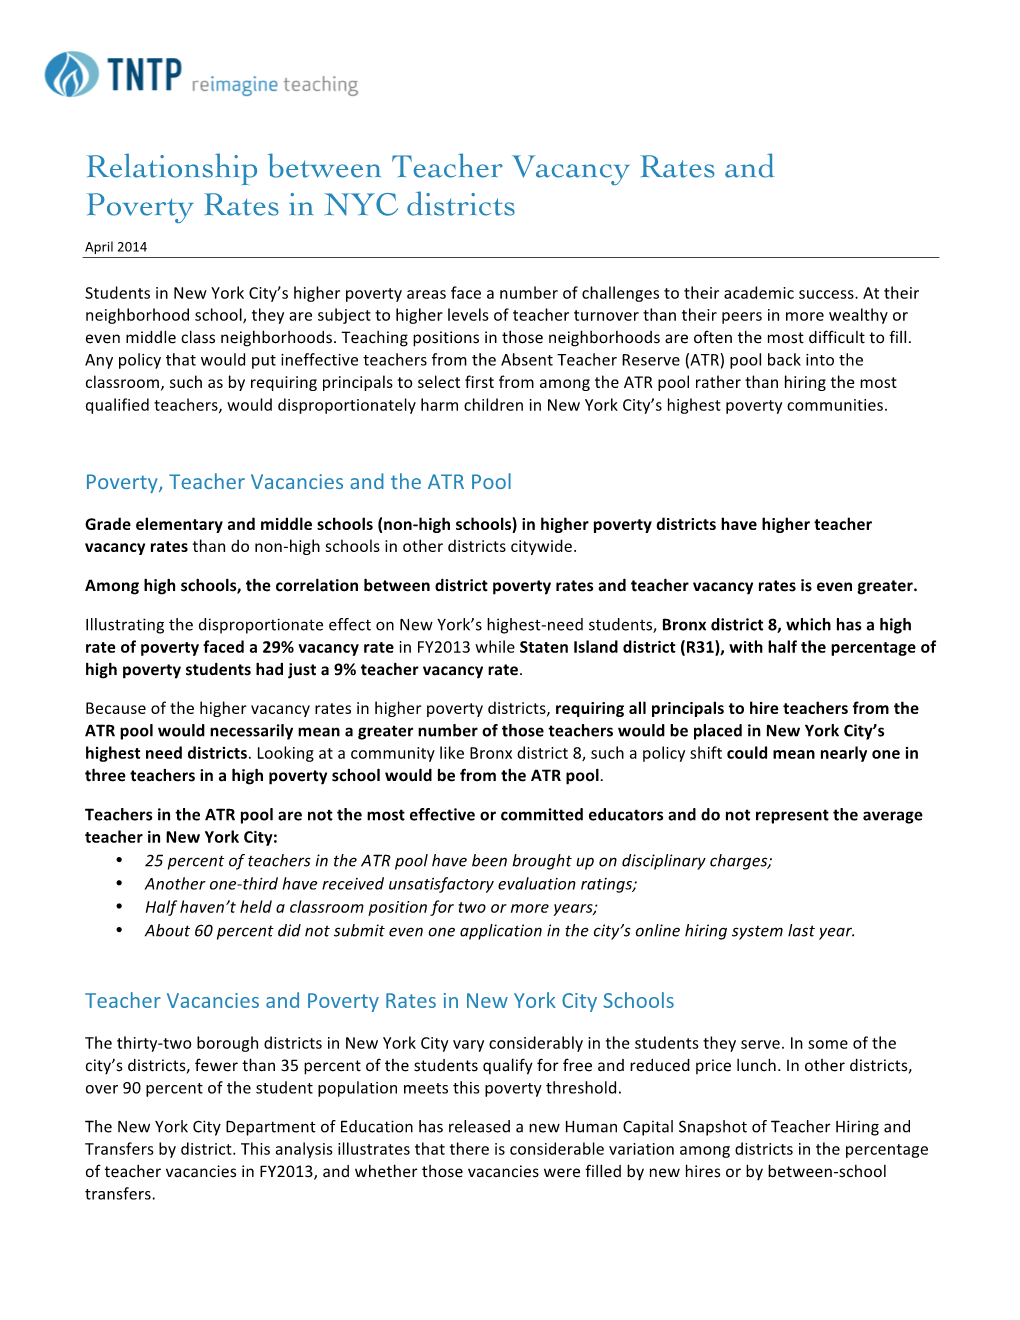 Relationship Between Teacher Vacancy Rates and Poverty Rates in NYC Districts